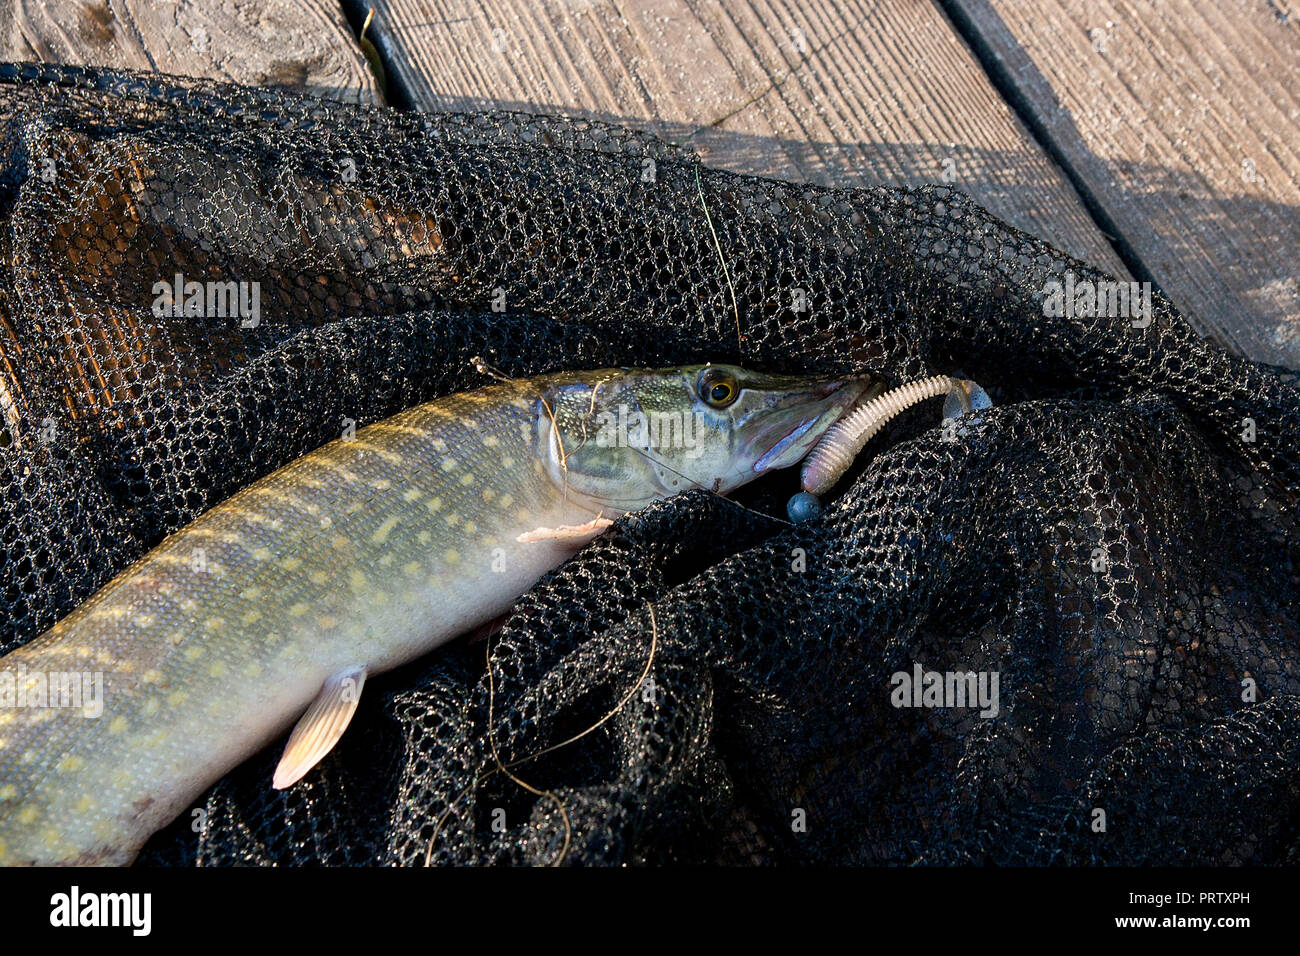 Freshwater Northern pike fish know as Esox Lucius lying on black fishing net.  Fishing concept, good catch - big freshwater pike with jig bait in mouth  Stock Photo - Alamy